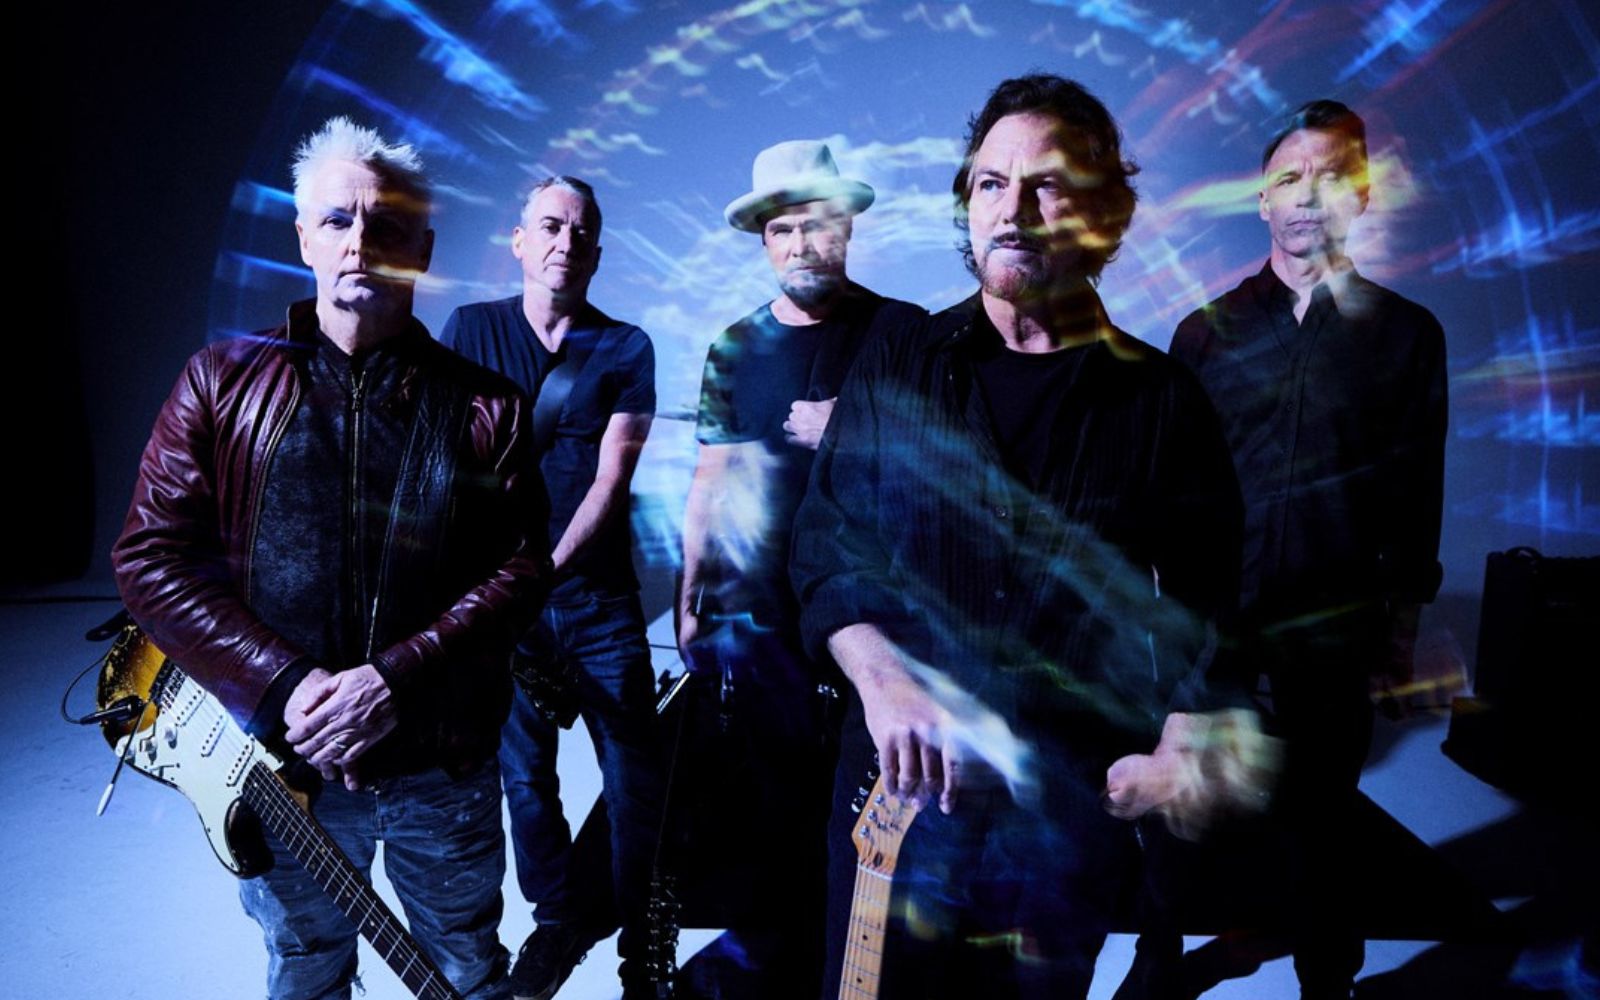 Pearl Jam, Pixies add two new shows to Australia tour 'We still care